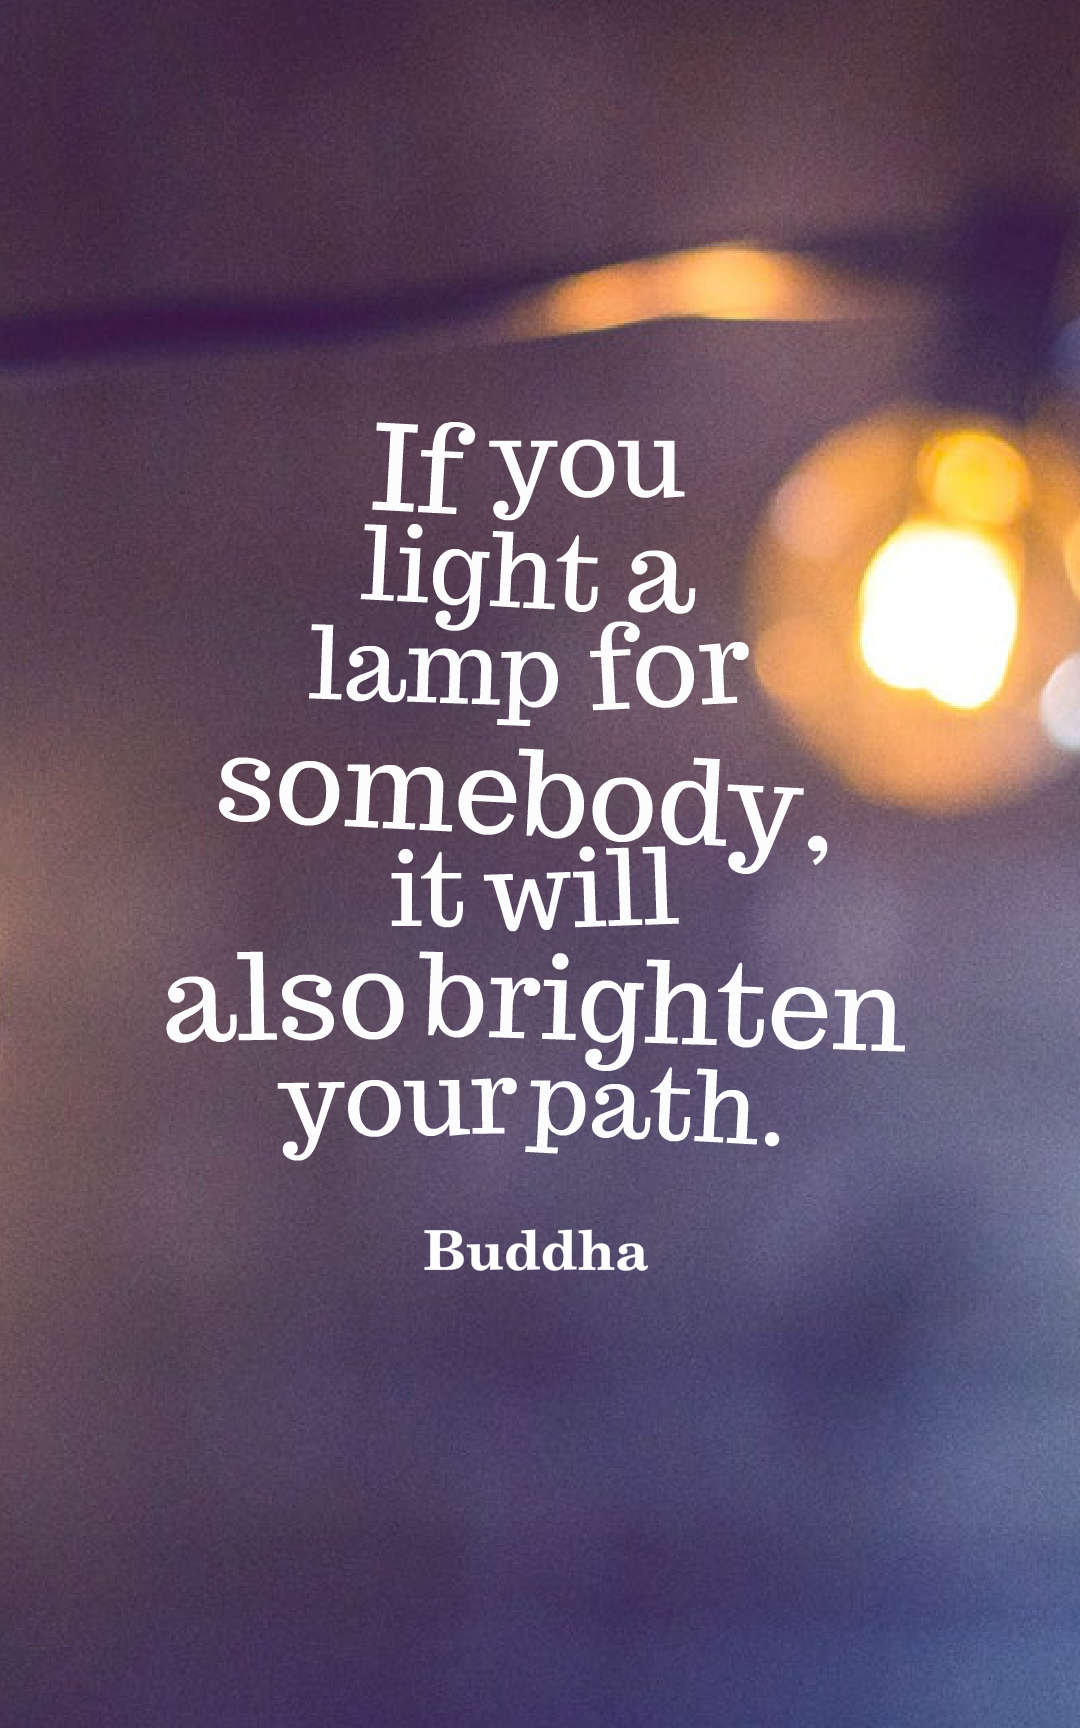 If you light a lamp for somebody it will also brighten your path.